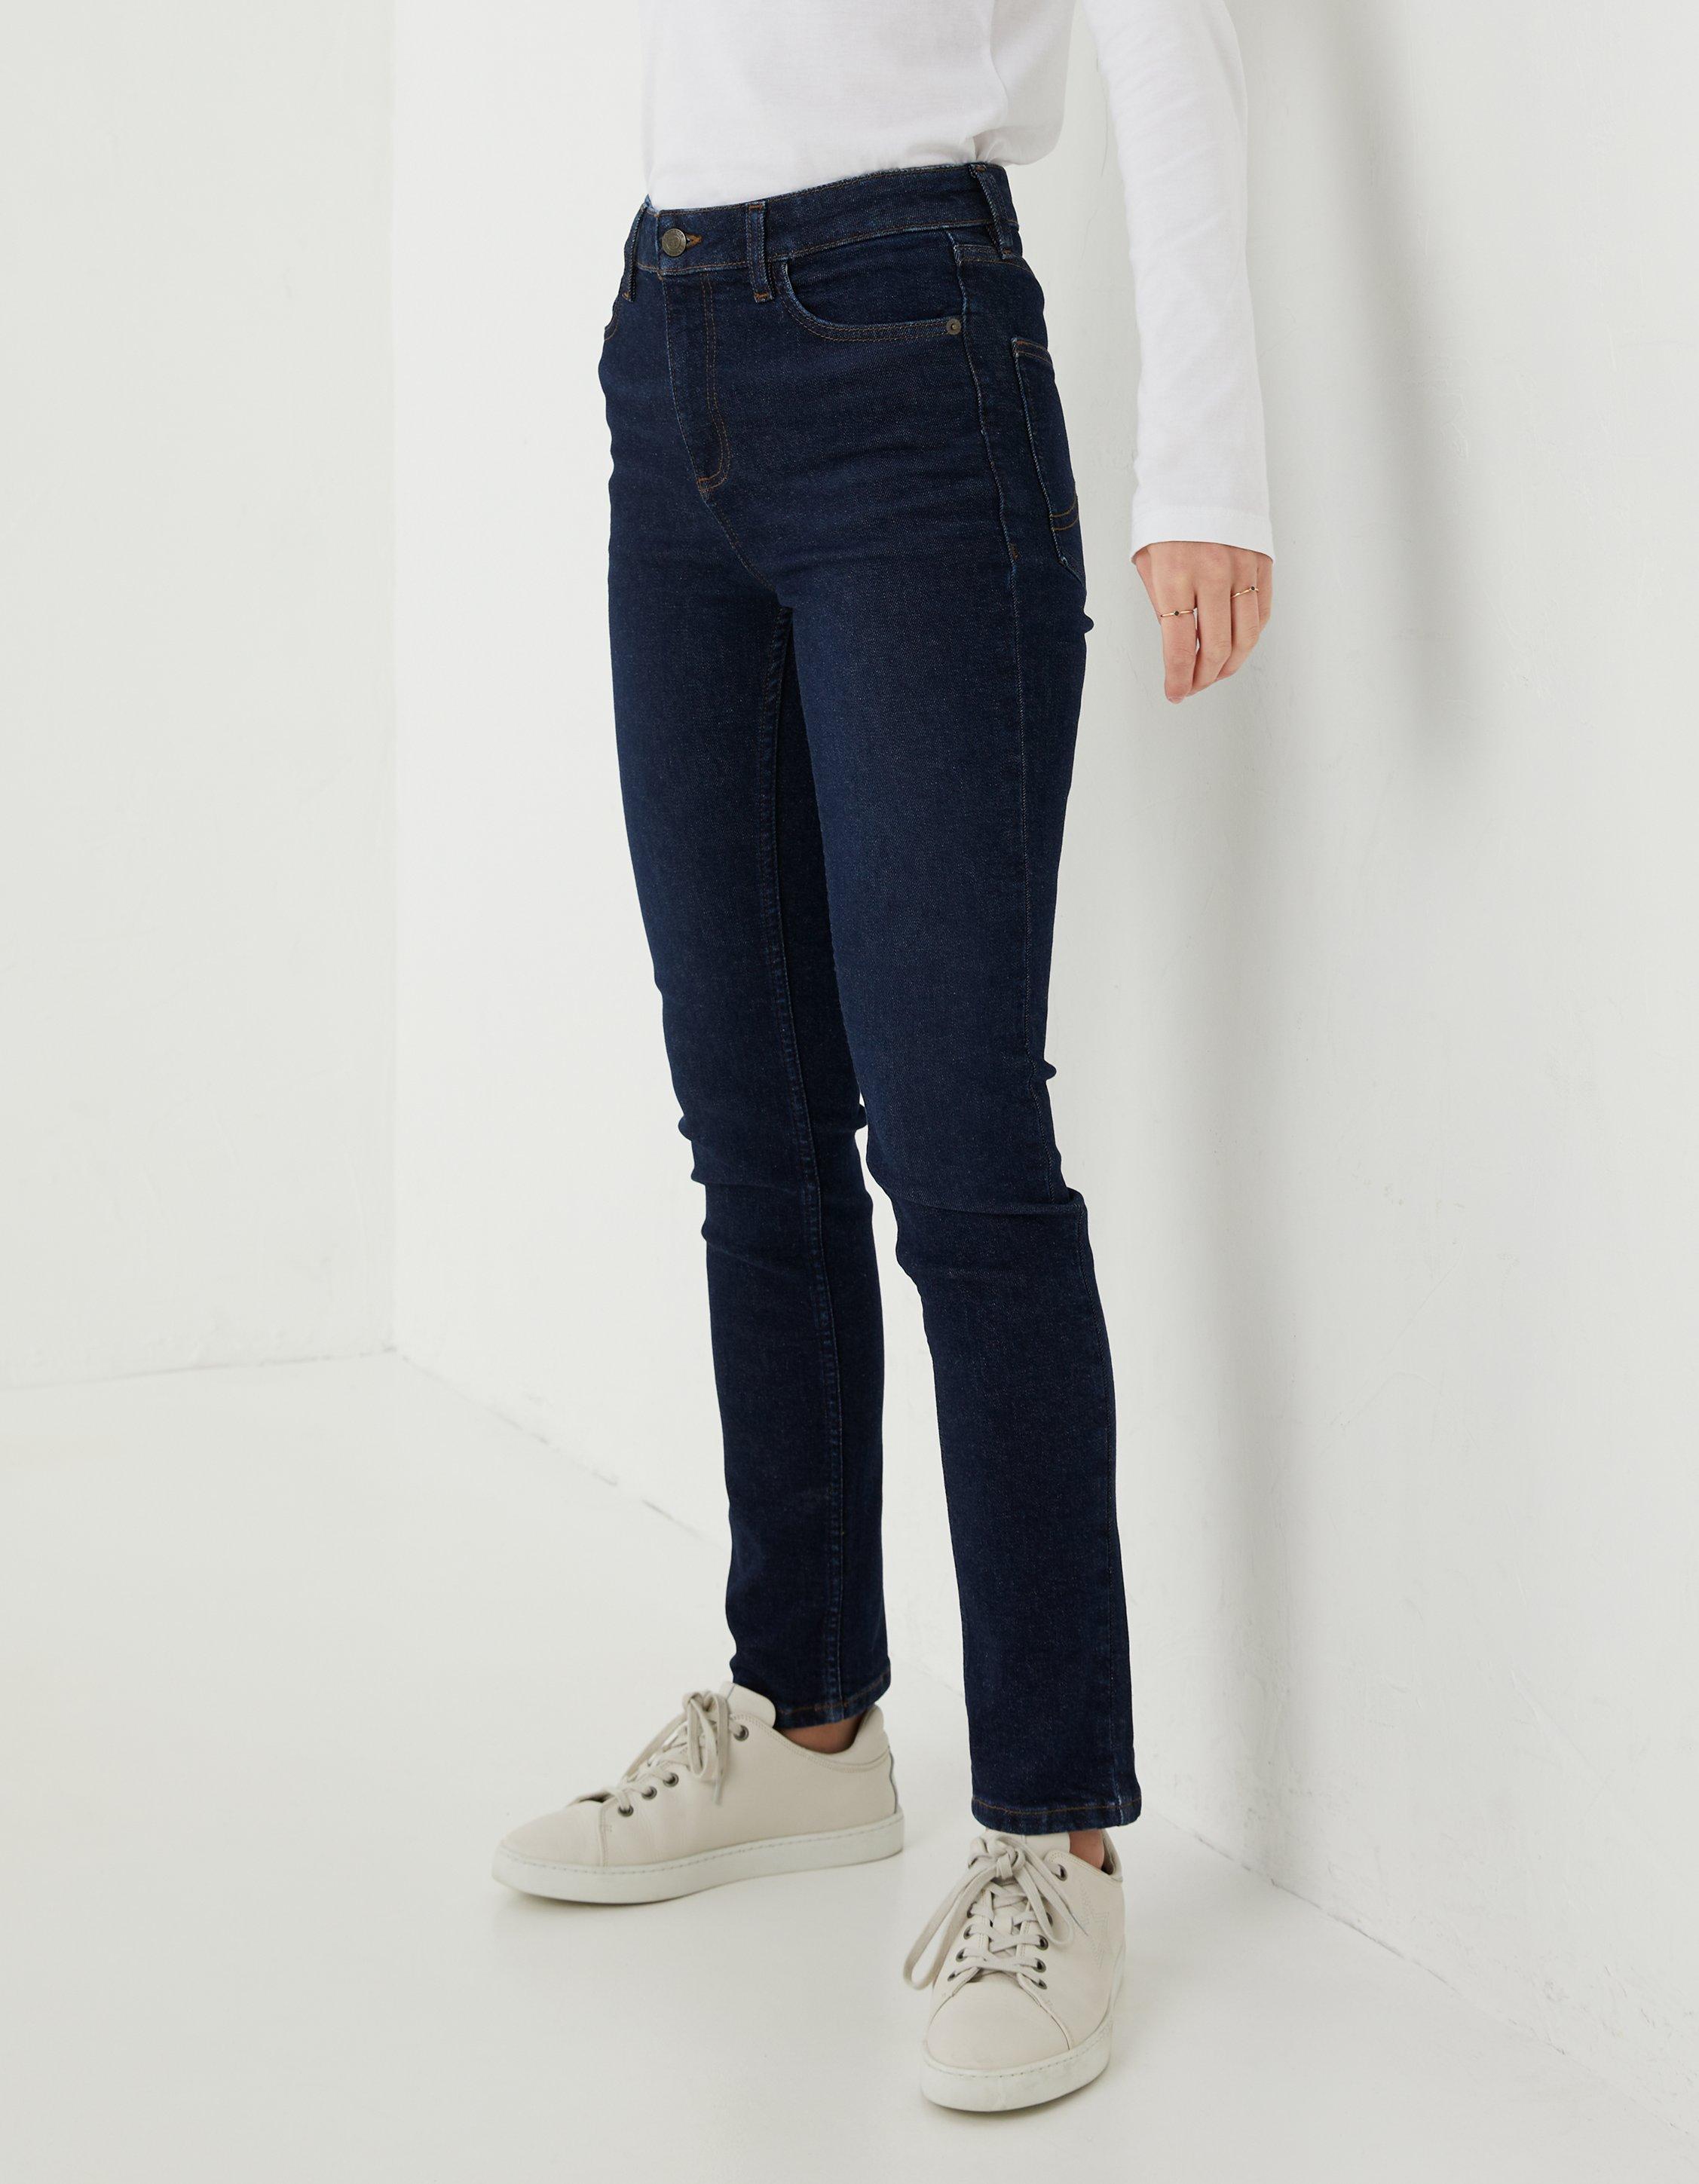 Sway Slim Leg Comfort Stretch Jeans, Jeans & Dungarees